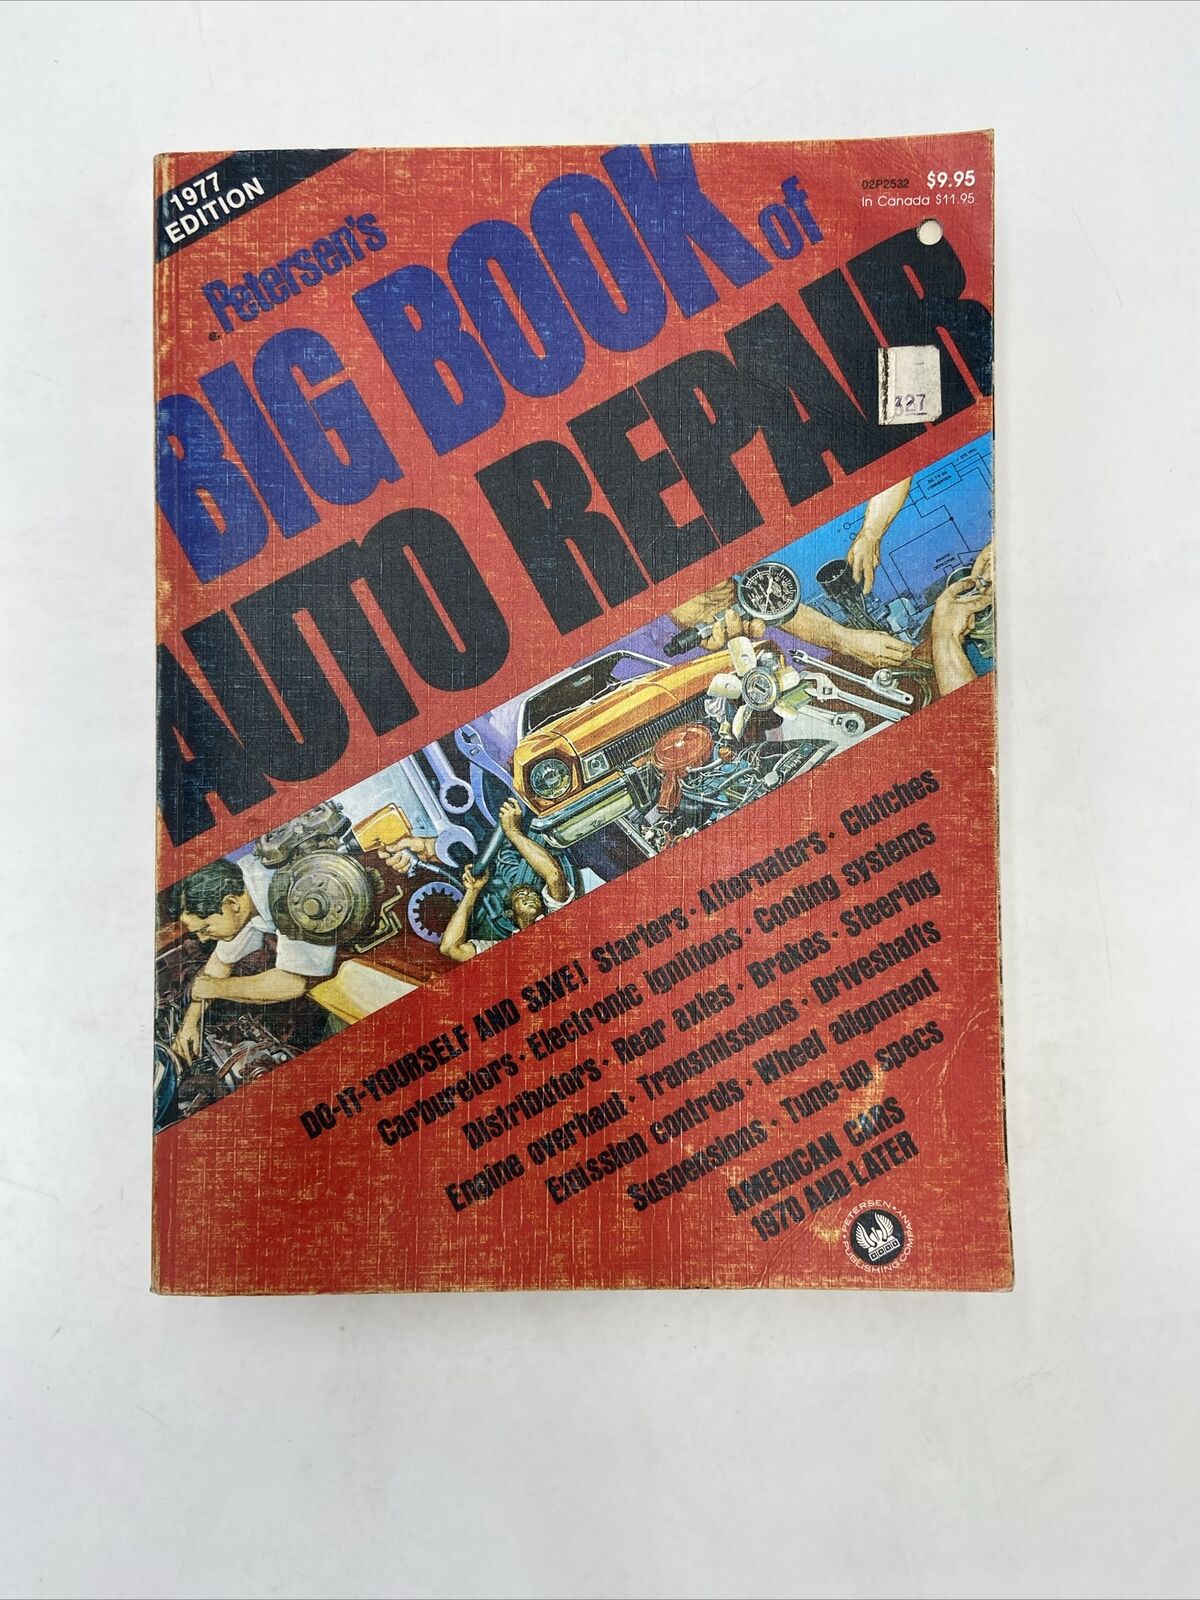 1977 Edition Petersen\'s Big Book of Auto Repair American Cars 1970 and Later 